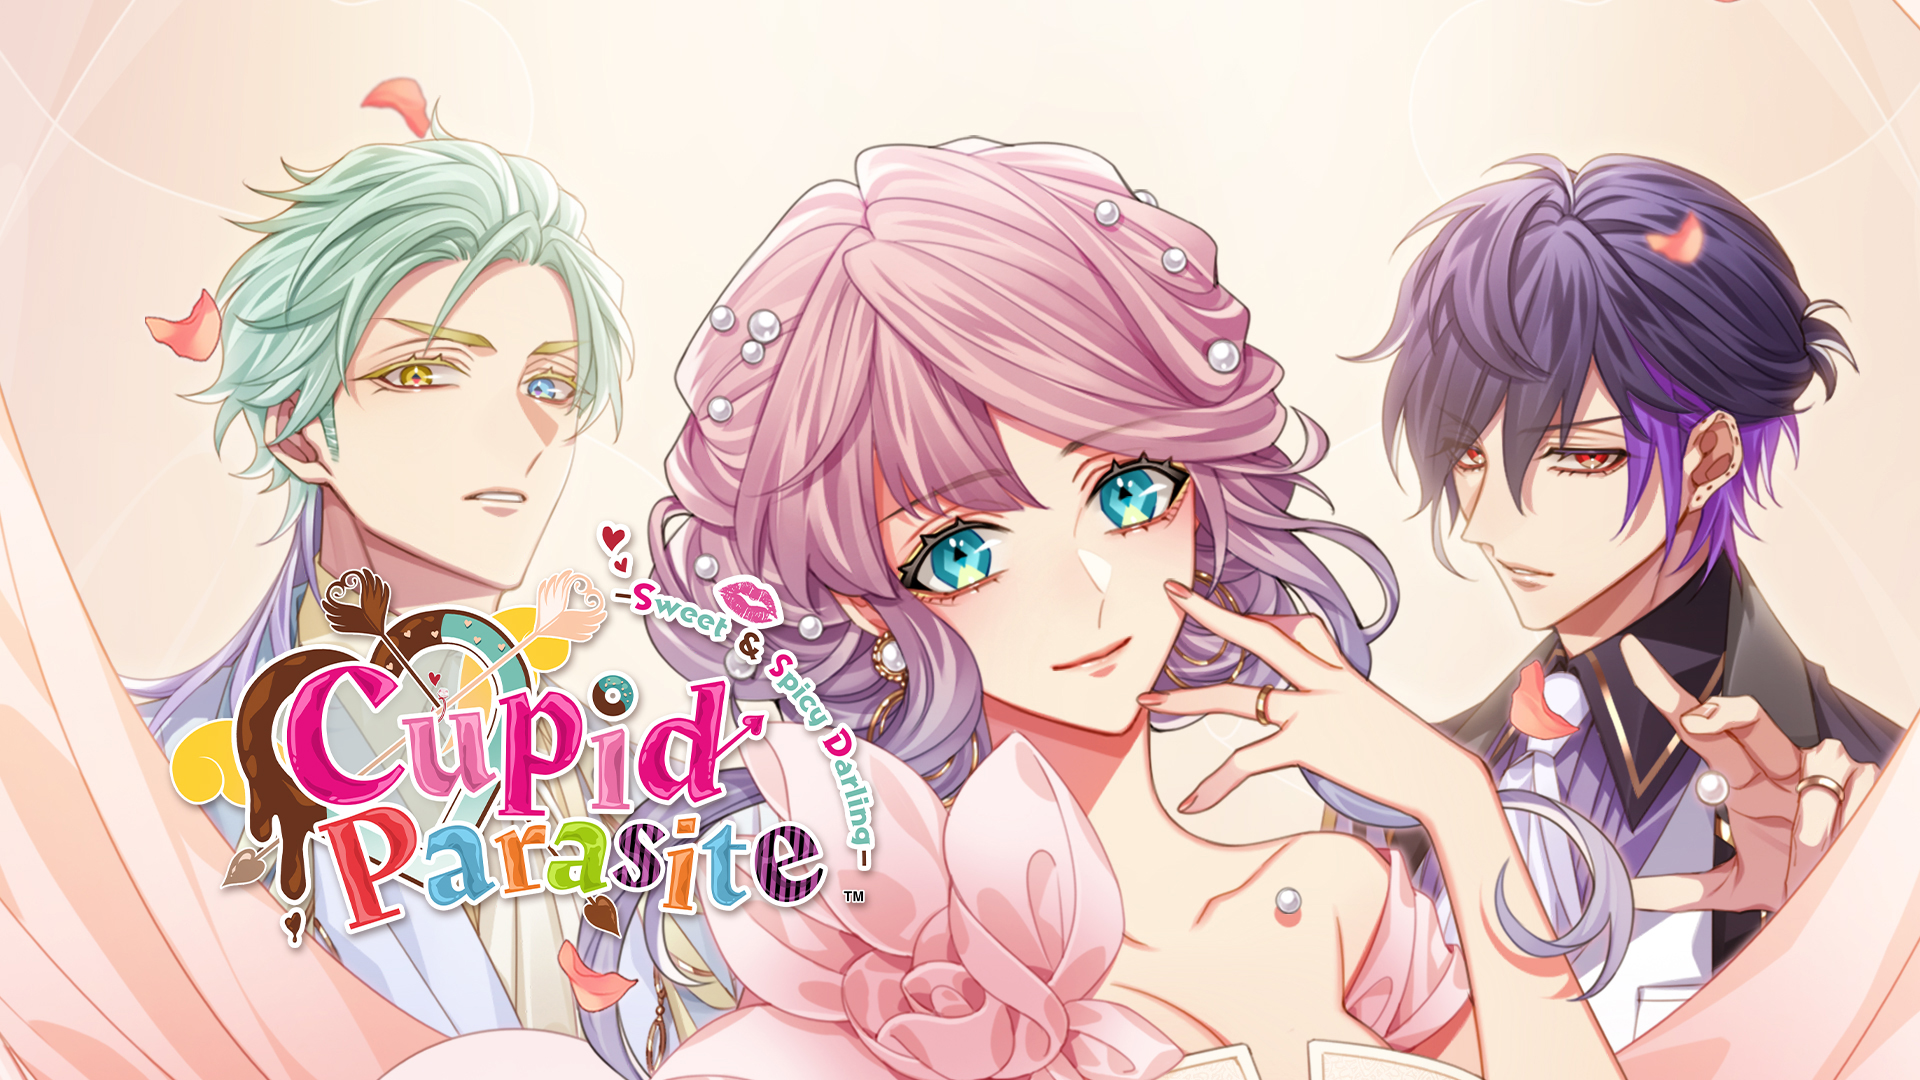 Cupid Parasite: Sweet and Spicy Darling